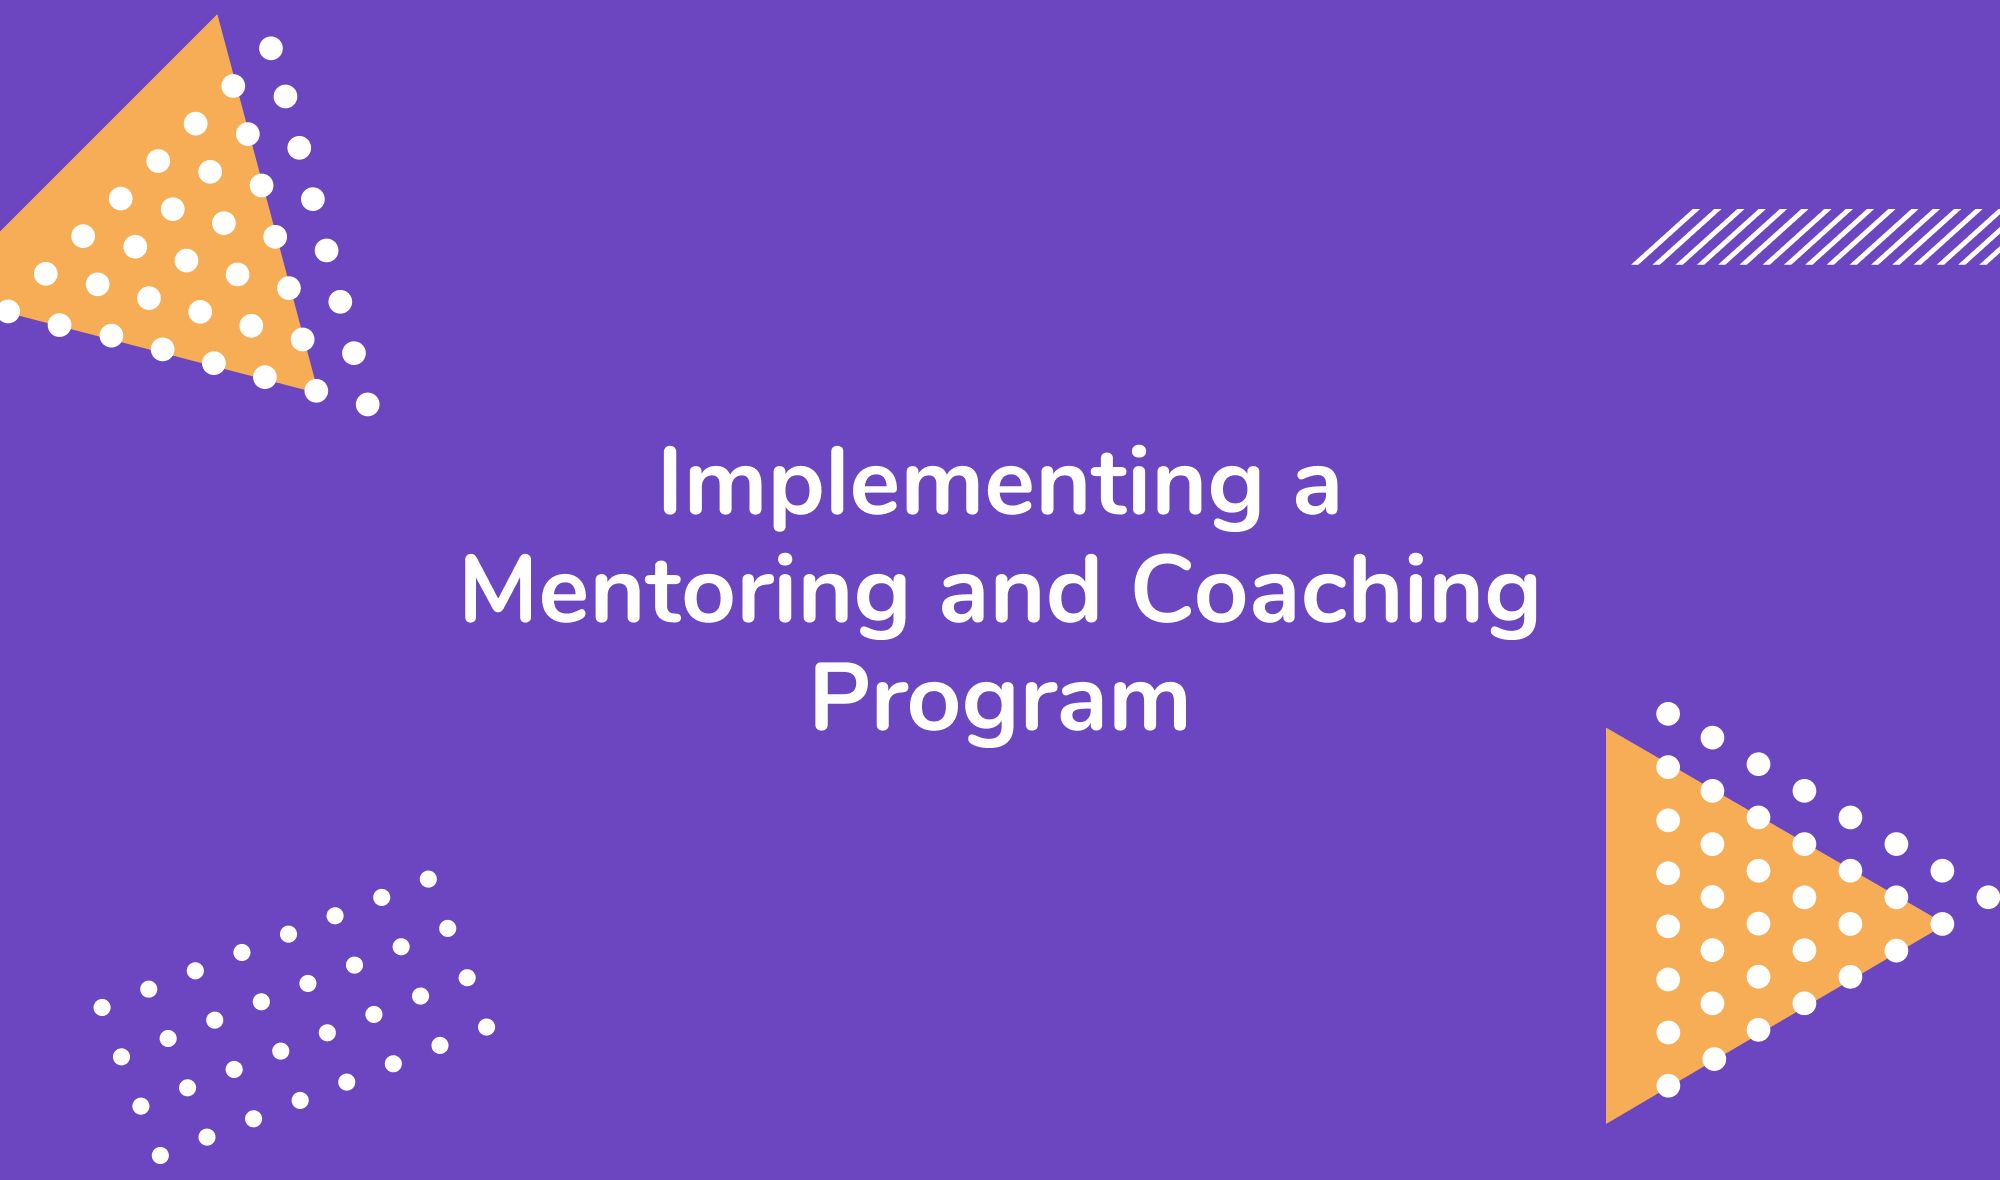 Case Study: Implementing a Mentoring and Coaching Program